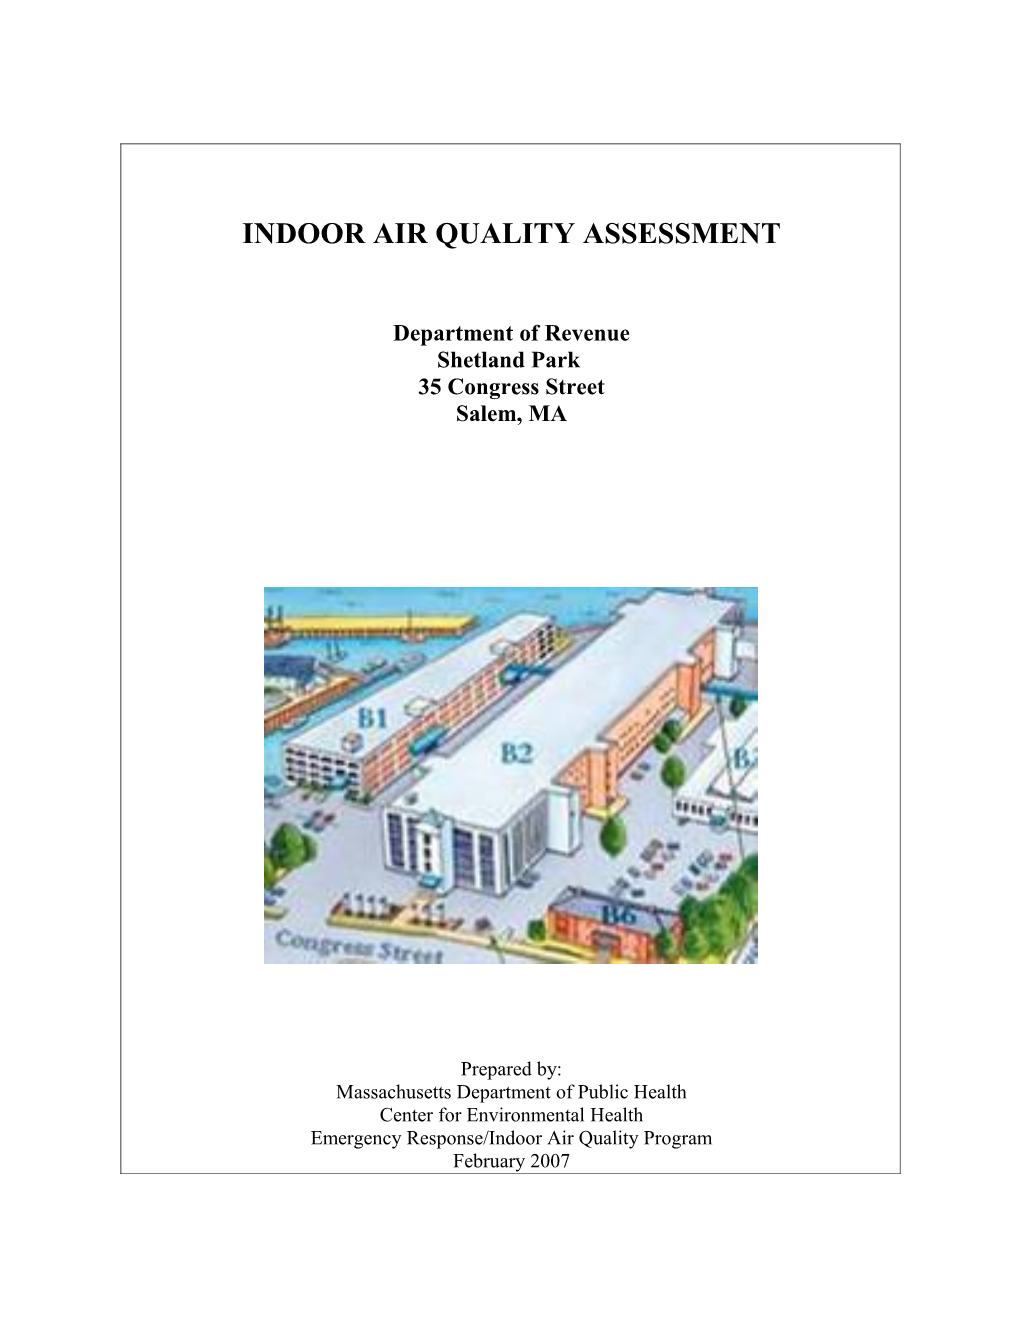 Indoor Air Quality Assessment s8